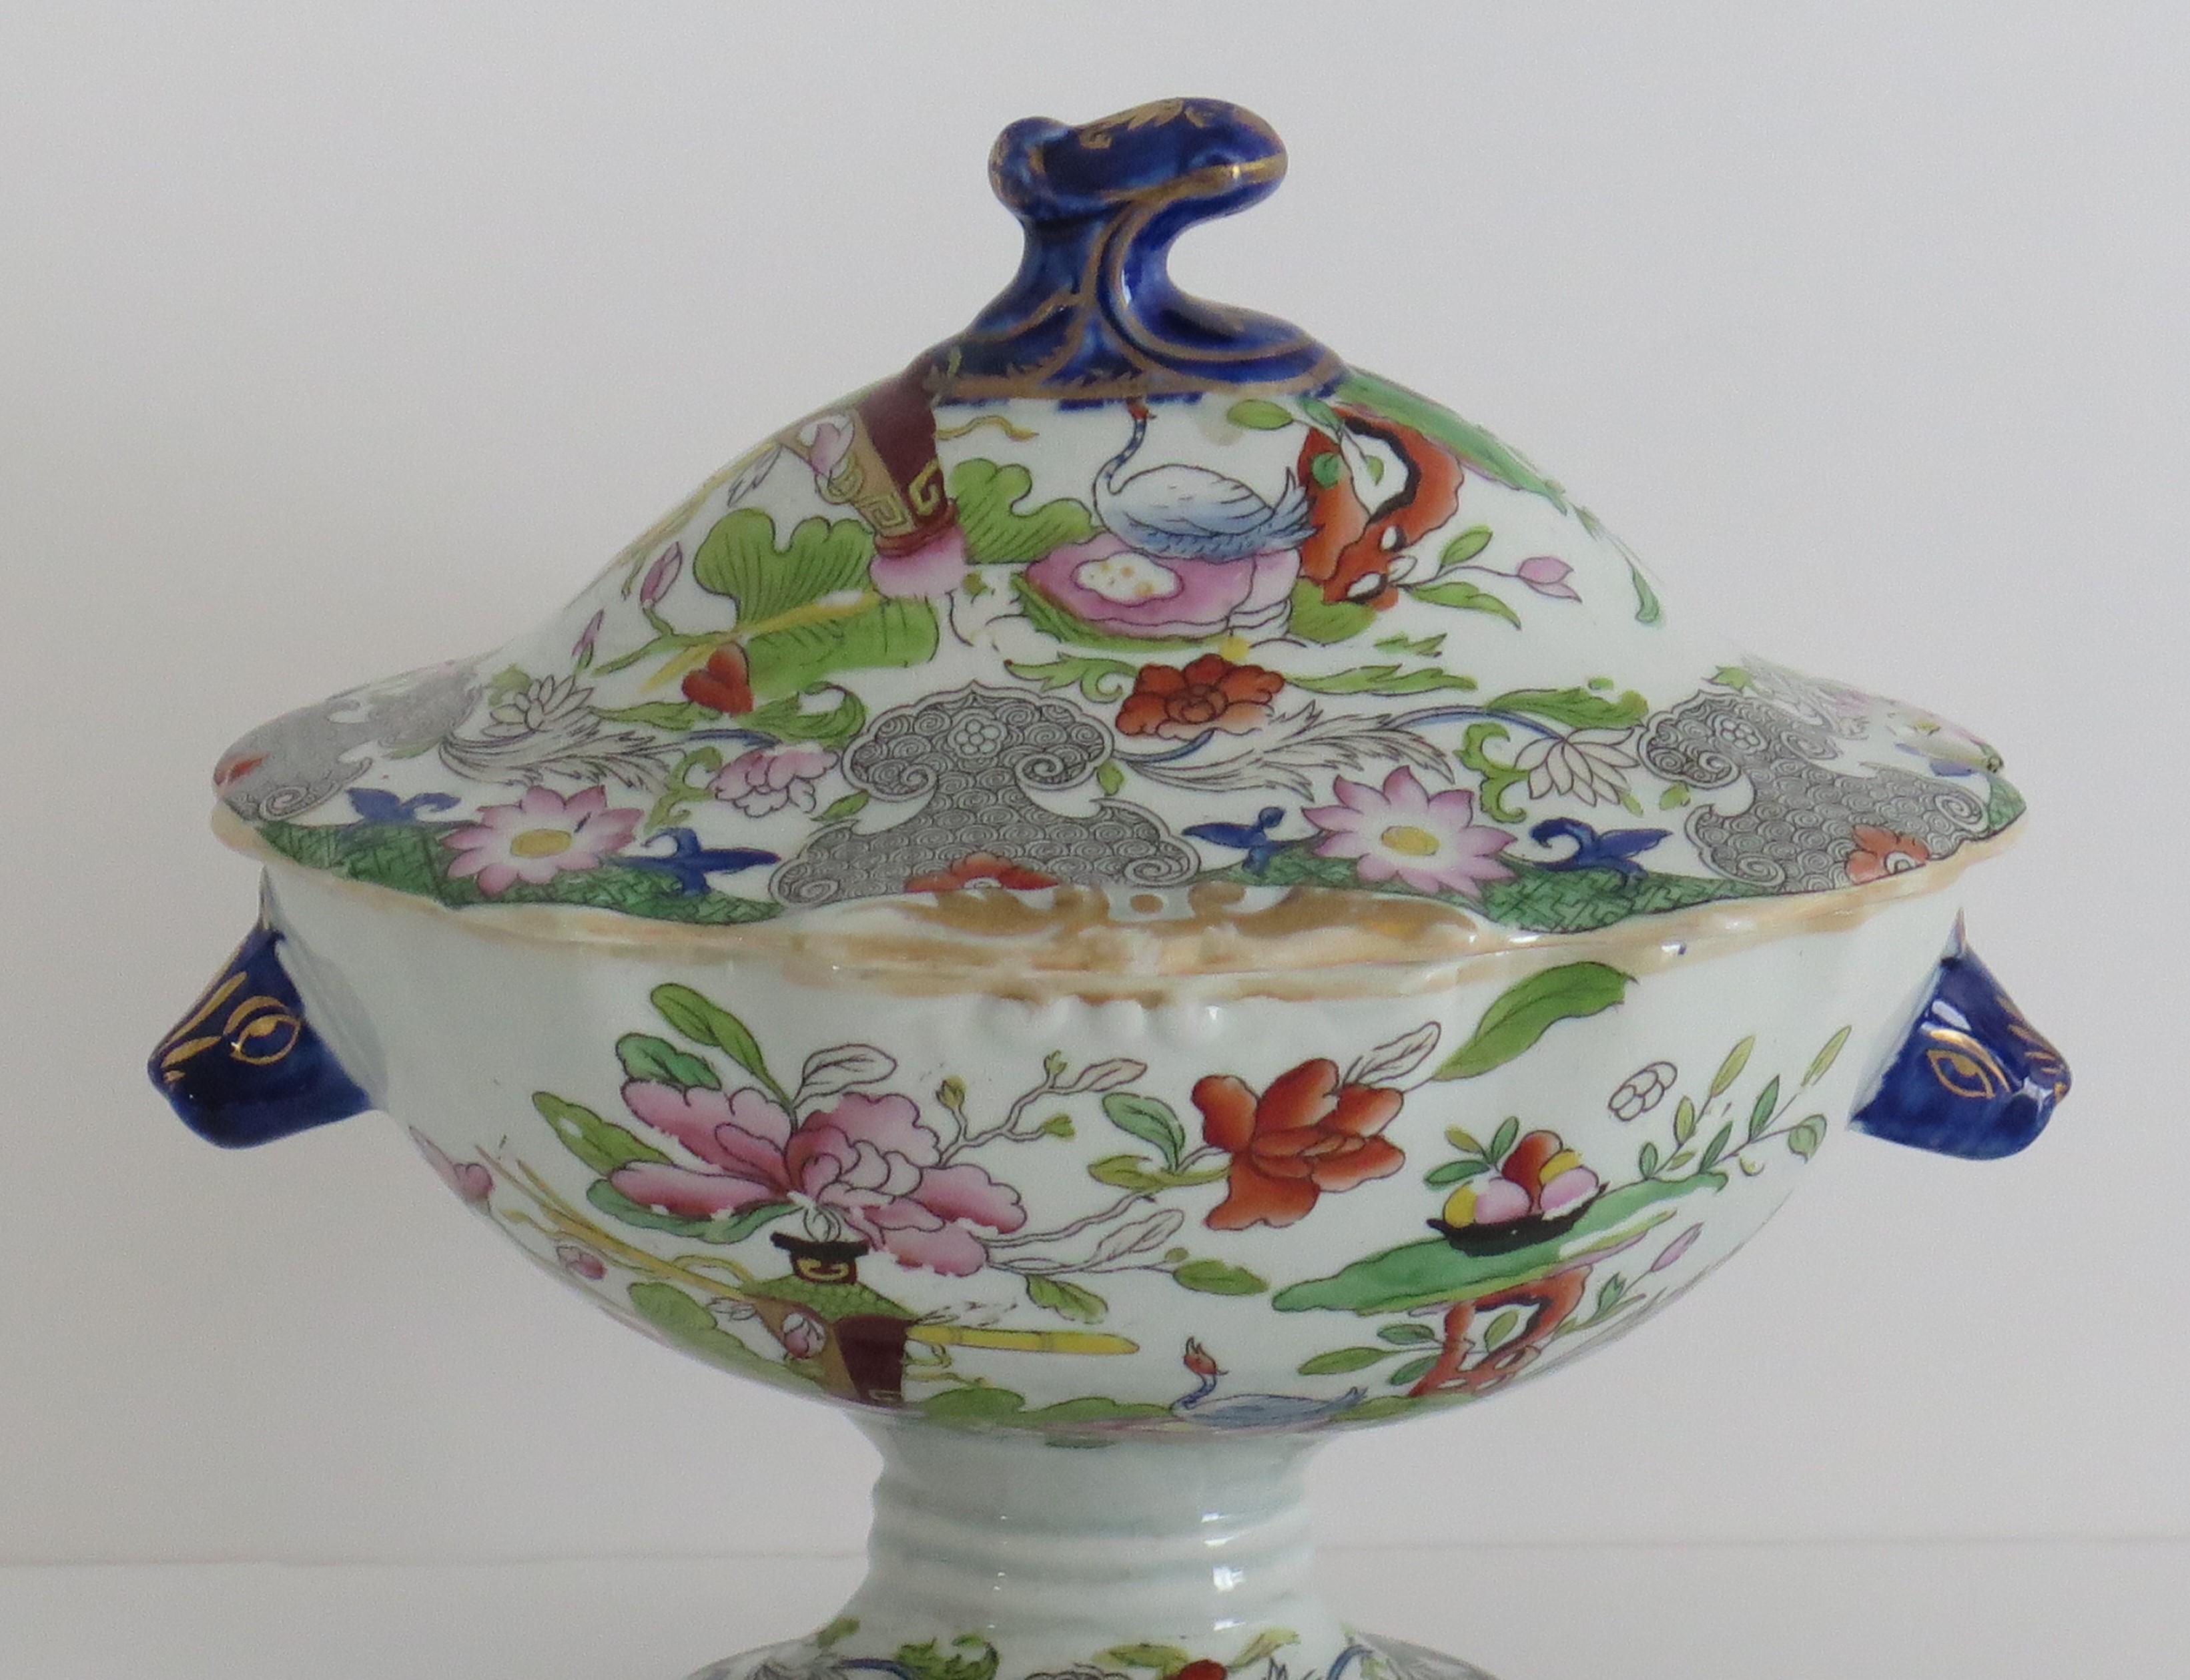 This is a beautiful Ironstone Sauce Tureen, complete with lid, made by Mason's of Lane Delph, Staffordshire, England, during the early part of the 19th century, circa 1820.

This tureen and its lid are well potted in an elegant pedestal shape on a